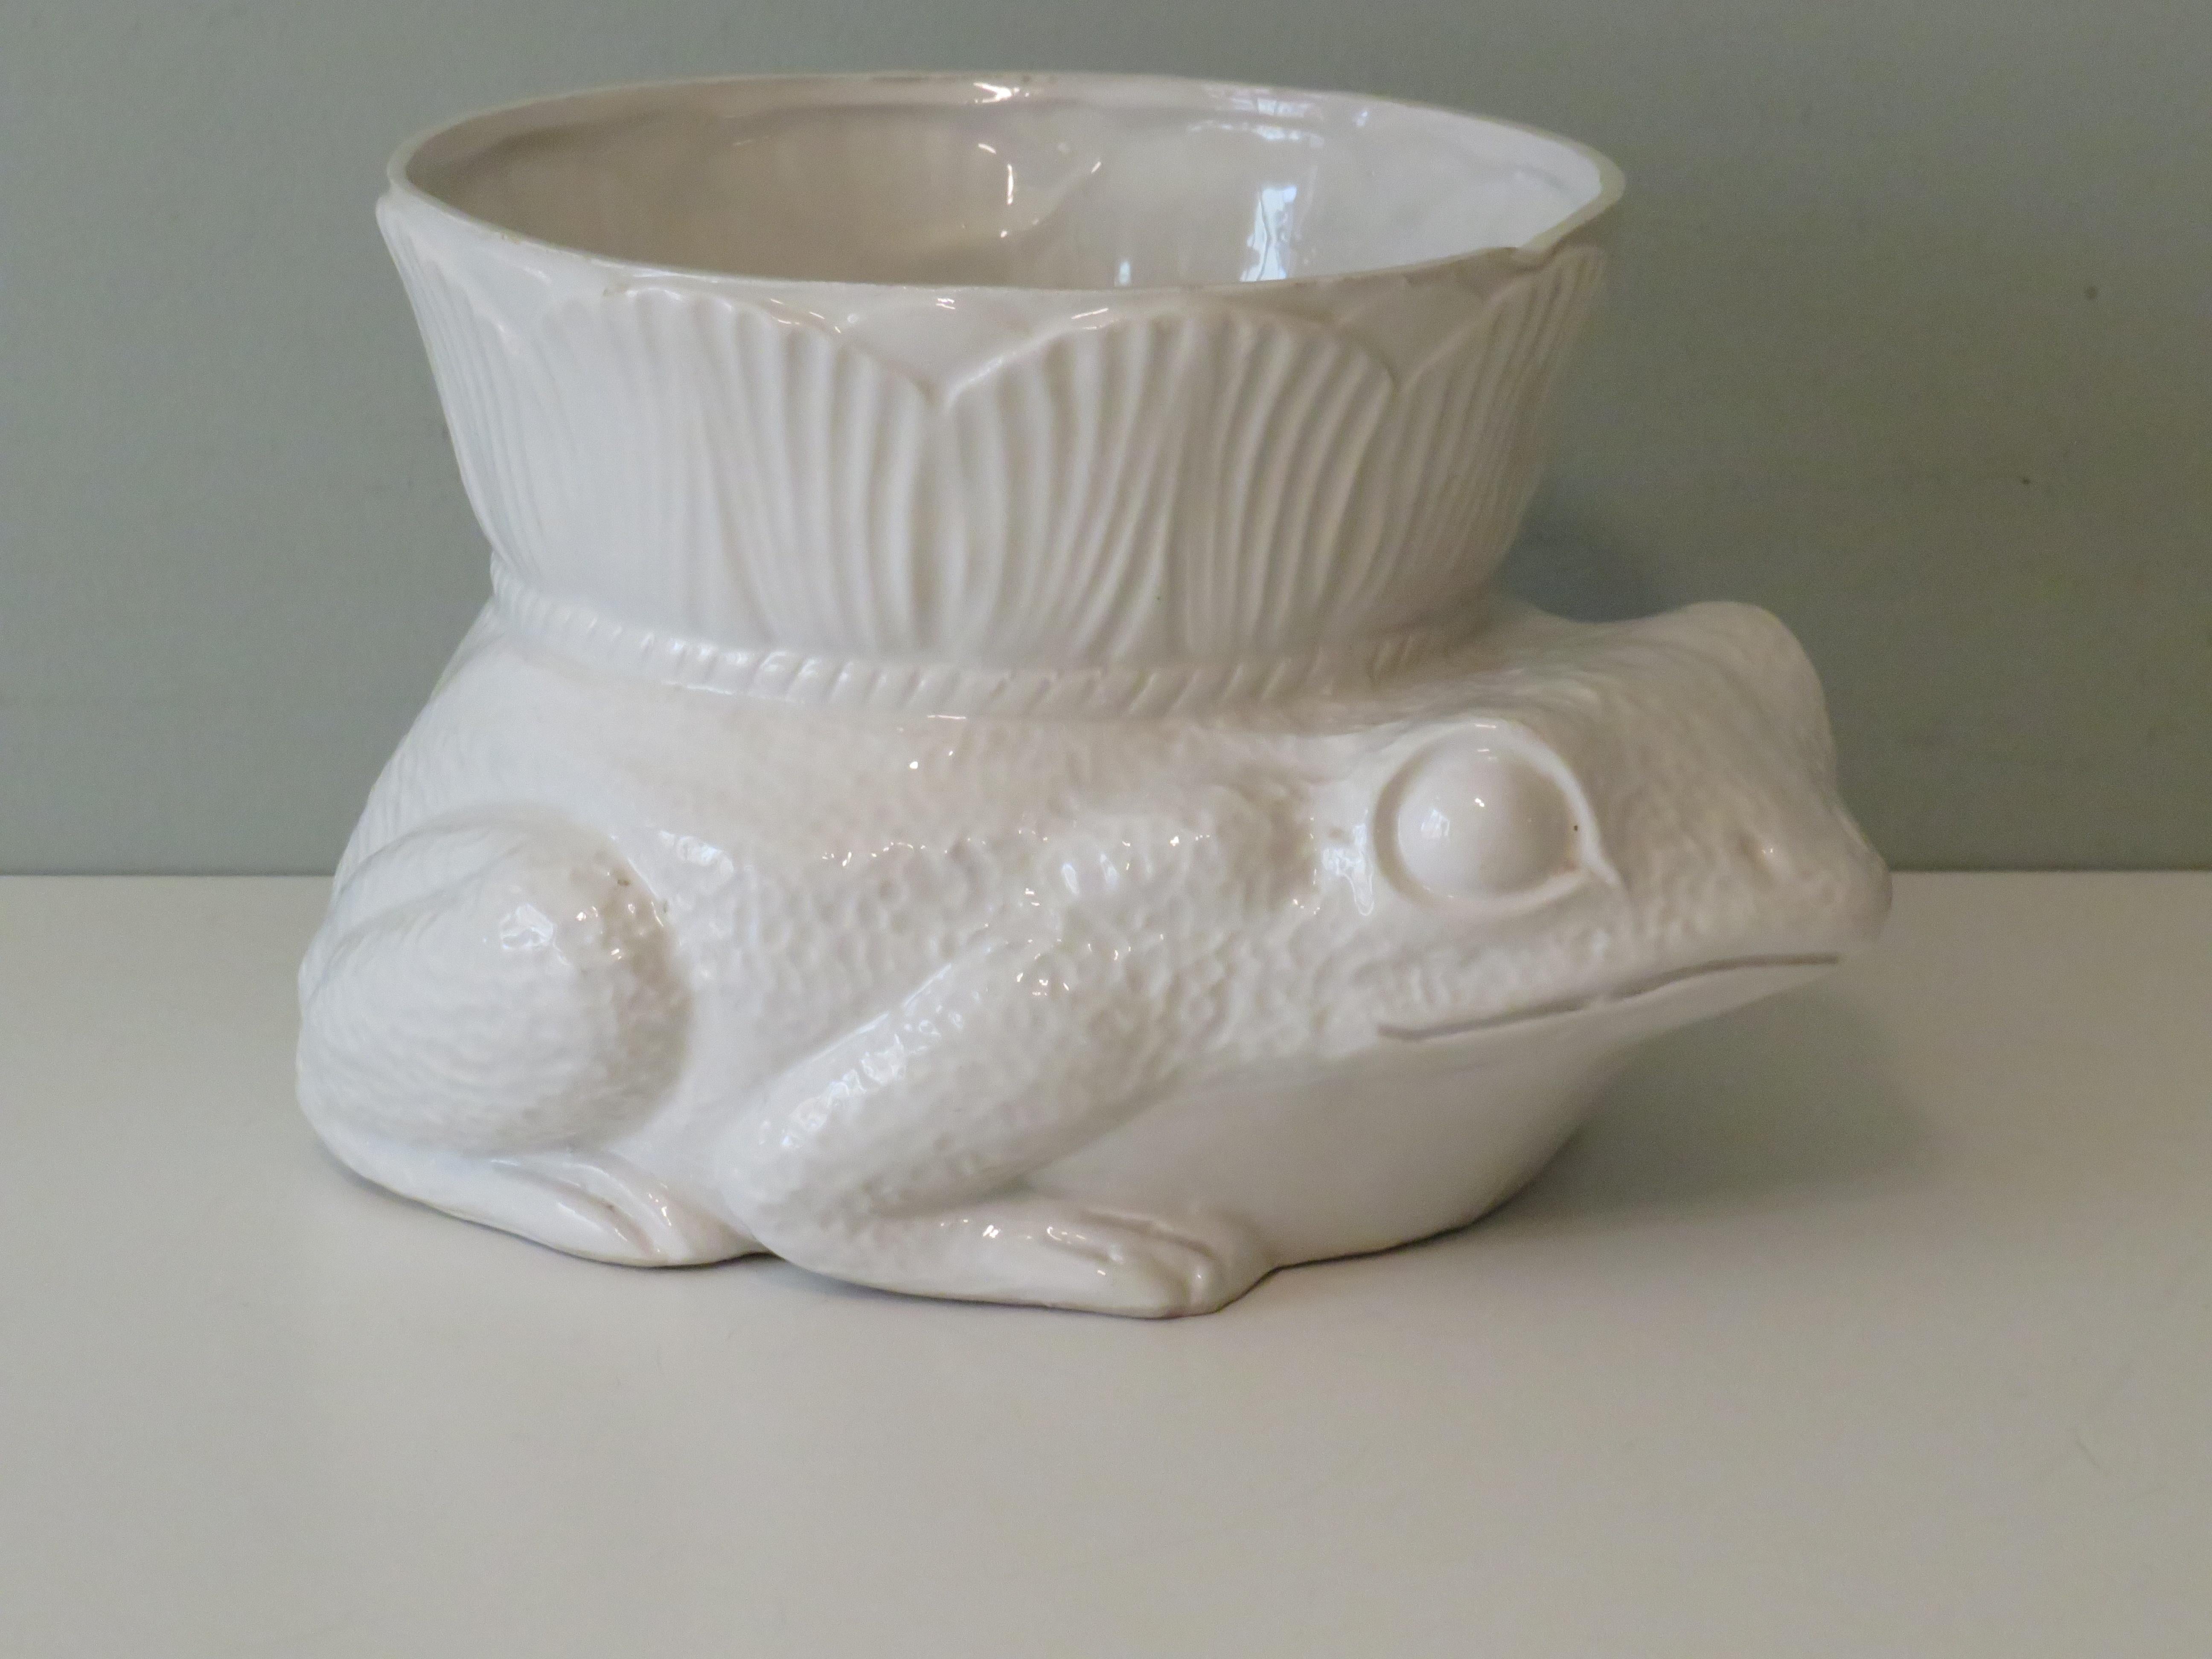 Fine ceramic planter in the shape of a frog with a stand-up collar.
The dimensions are: 27 x 22 cm and the height is 15.5 cm.
The planter is suitable for an inner pot with a maximum height of 15 cm and a diameter of 16 cm that slopes downwards. At